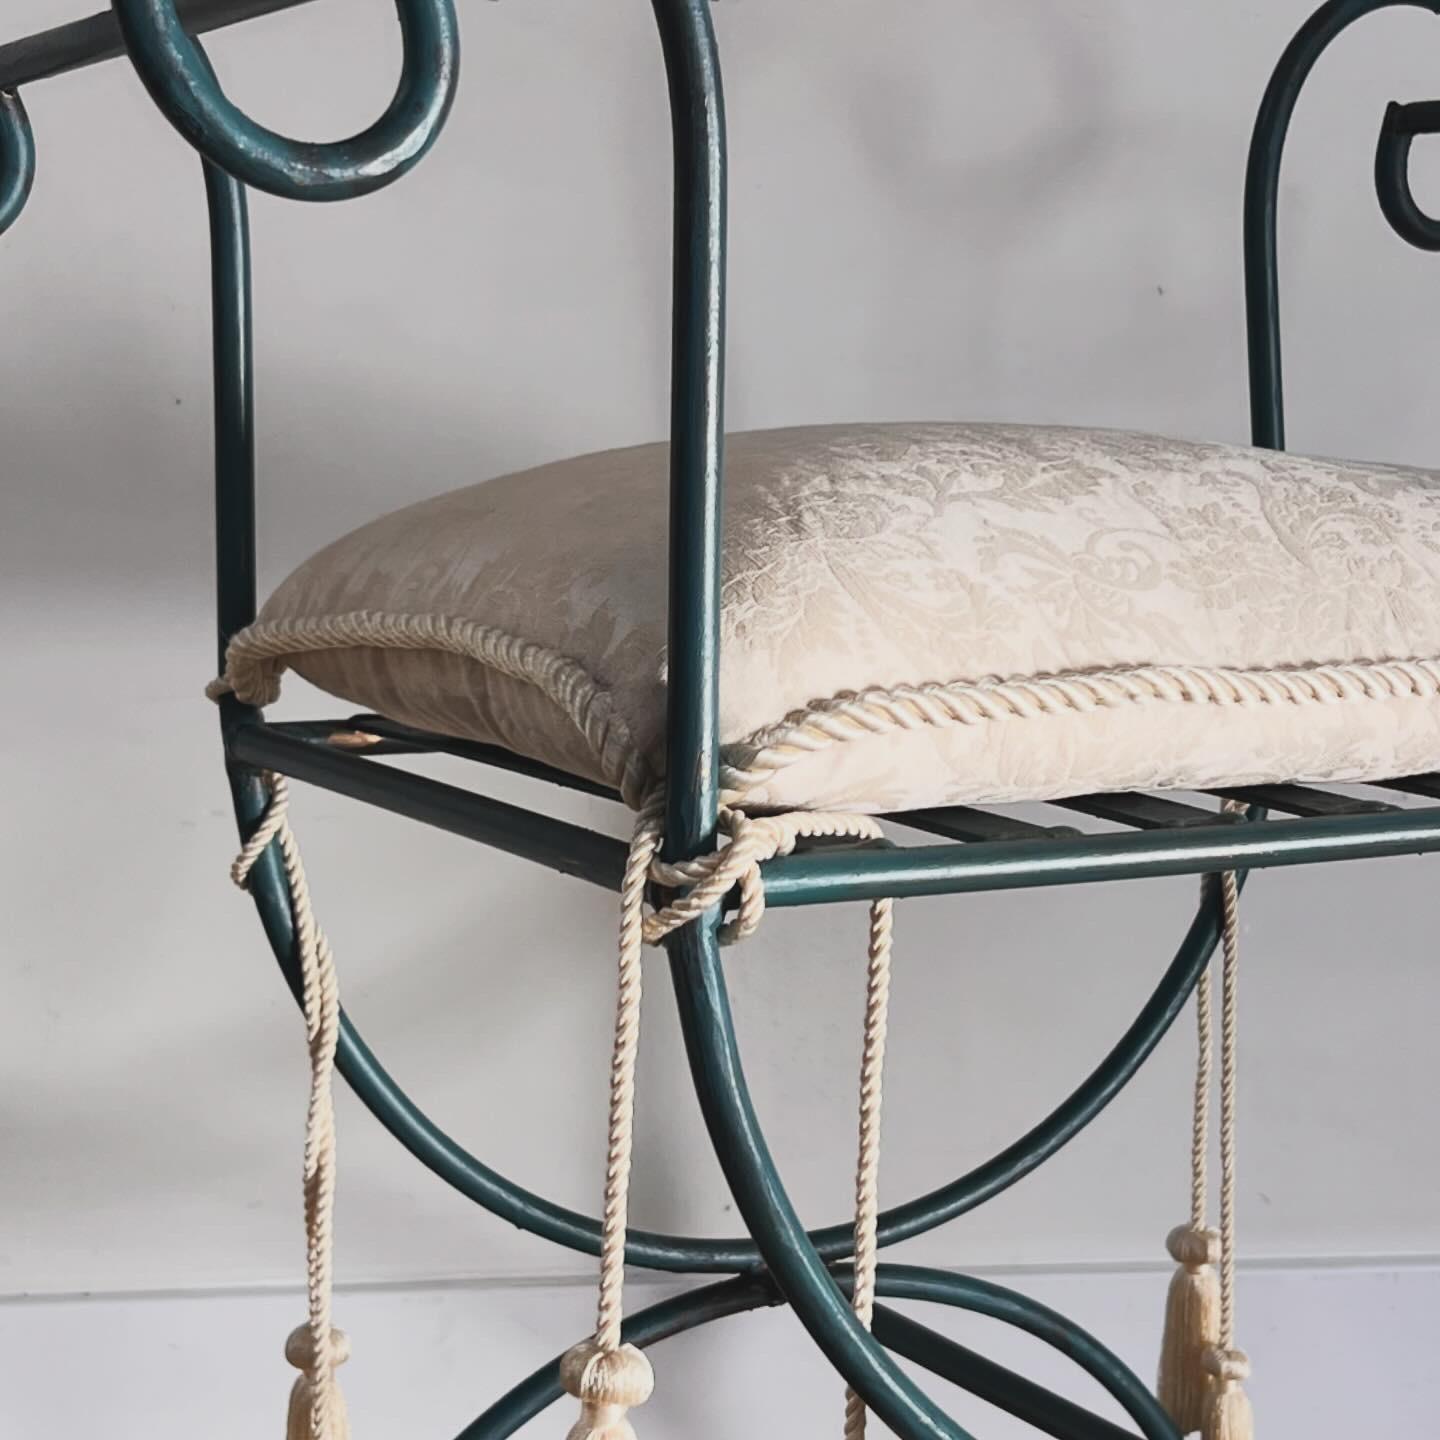 Vintage iron vanity stool with tasseled seat pillow, 20th century  In Good Condition For Sale In View Park, CA